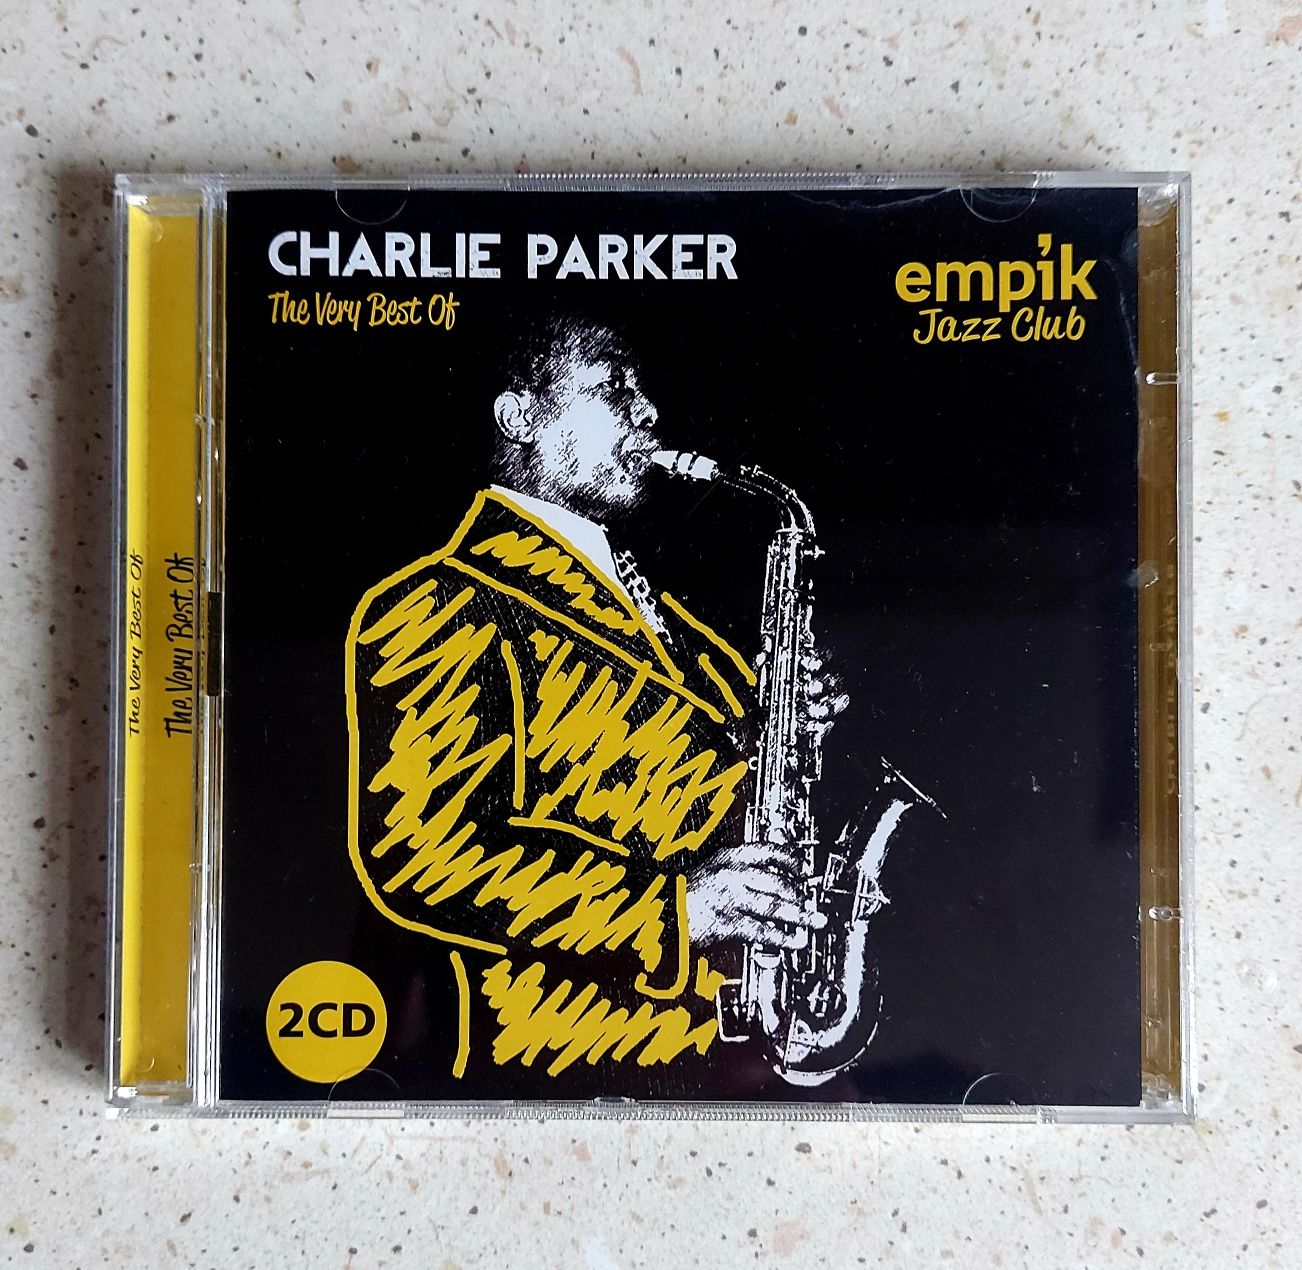 Charlie Parker The very Best of